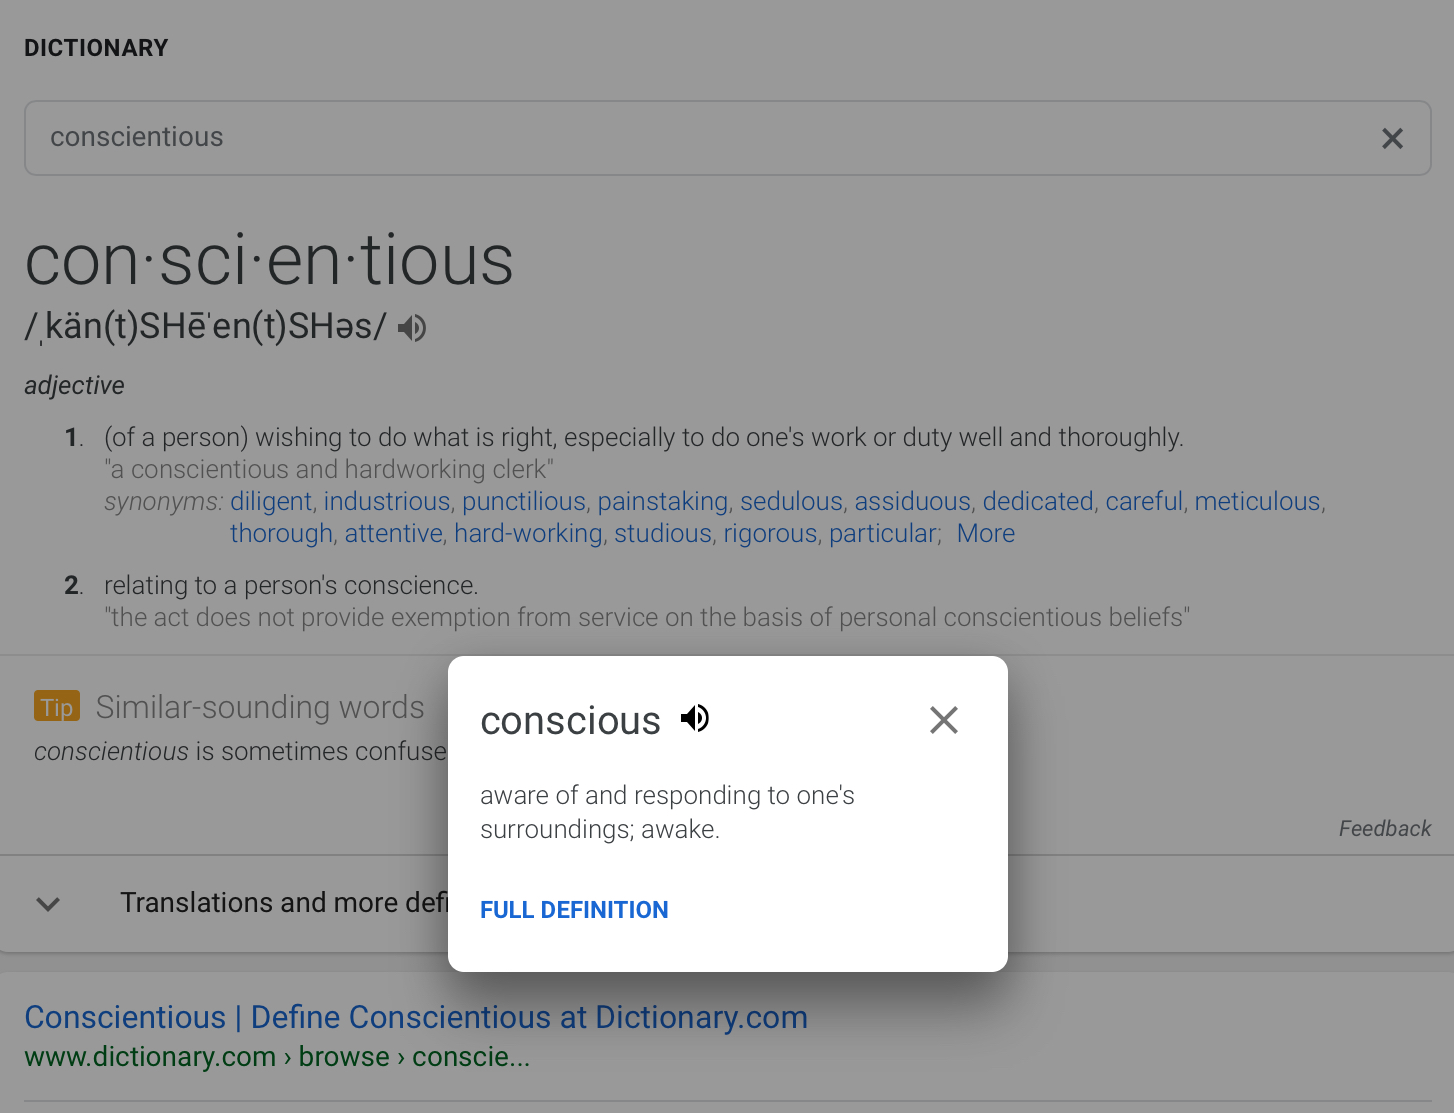 Google Adds ‘Similar Sounding Words’ to Dictionary Search Cards